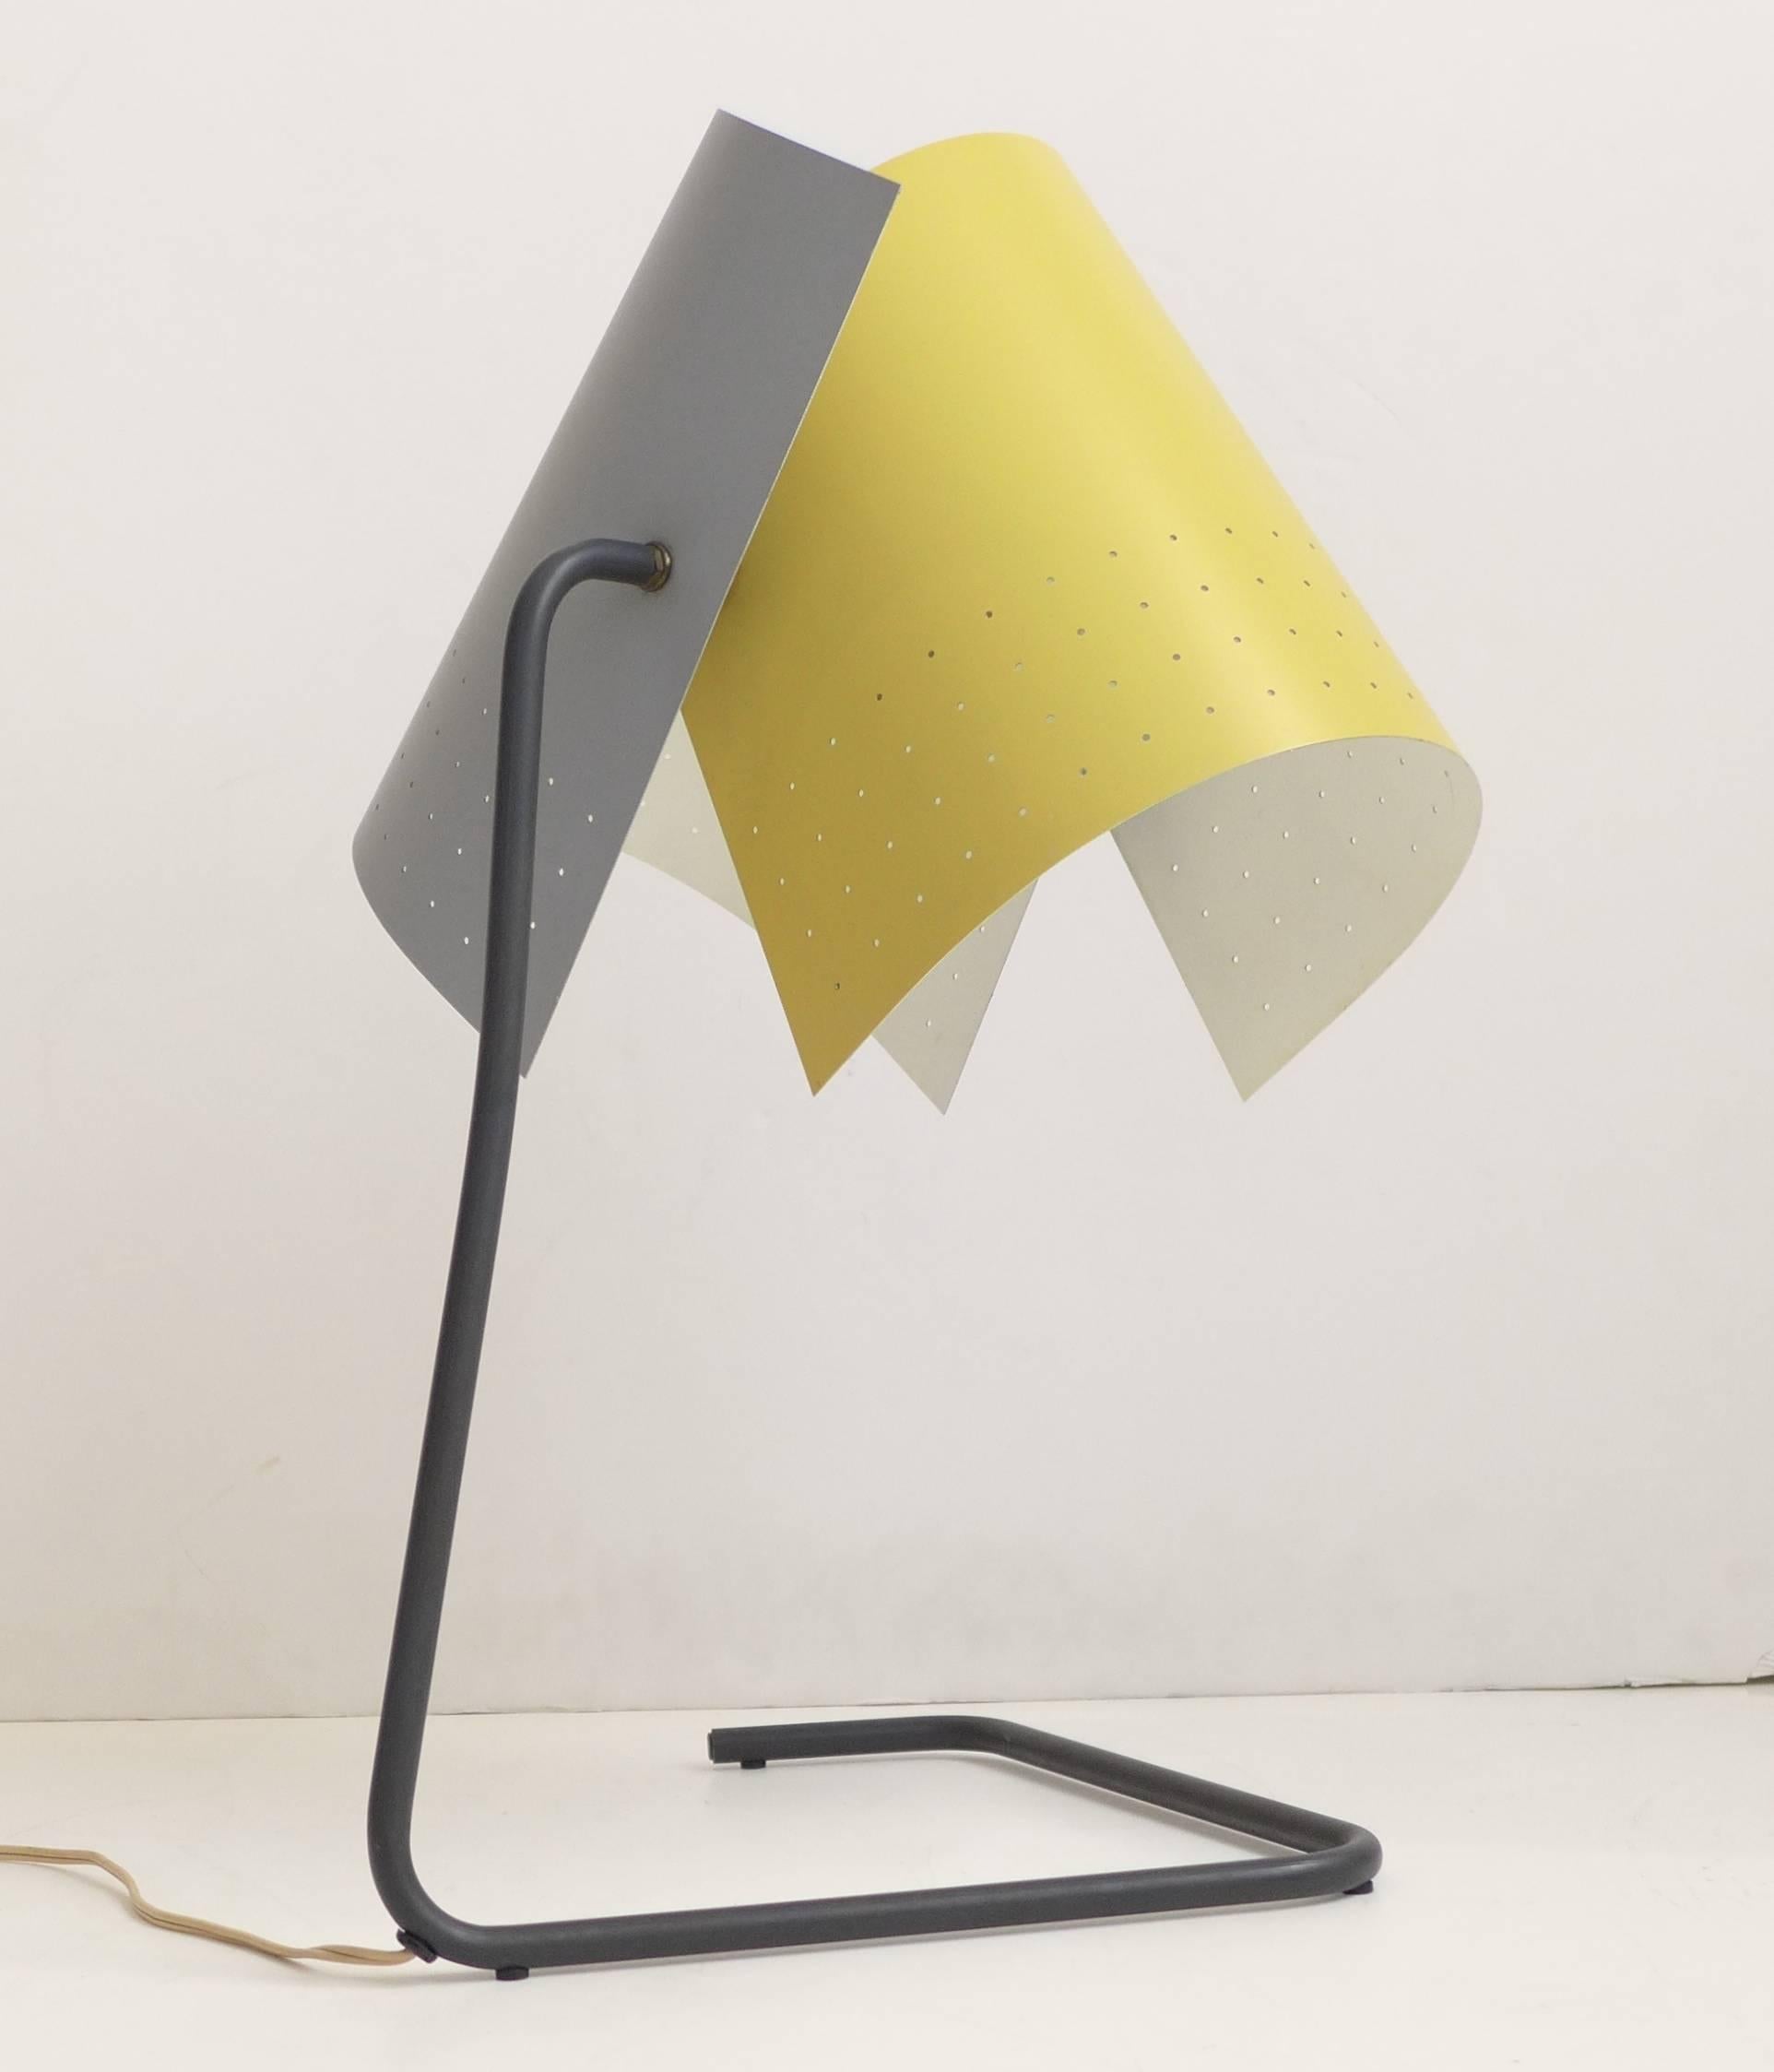 Adjustable table lamp, model T-5-G, with perforated and enameled metal shades and a bent tubular metal base designed by architect Lester Geis. An Honorable Mention selection at the famed 1951 MoMA Low-Cost Lighting Competition. Produced in very